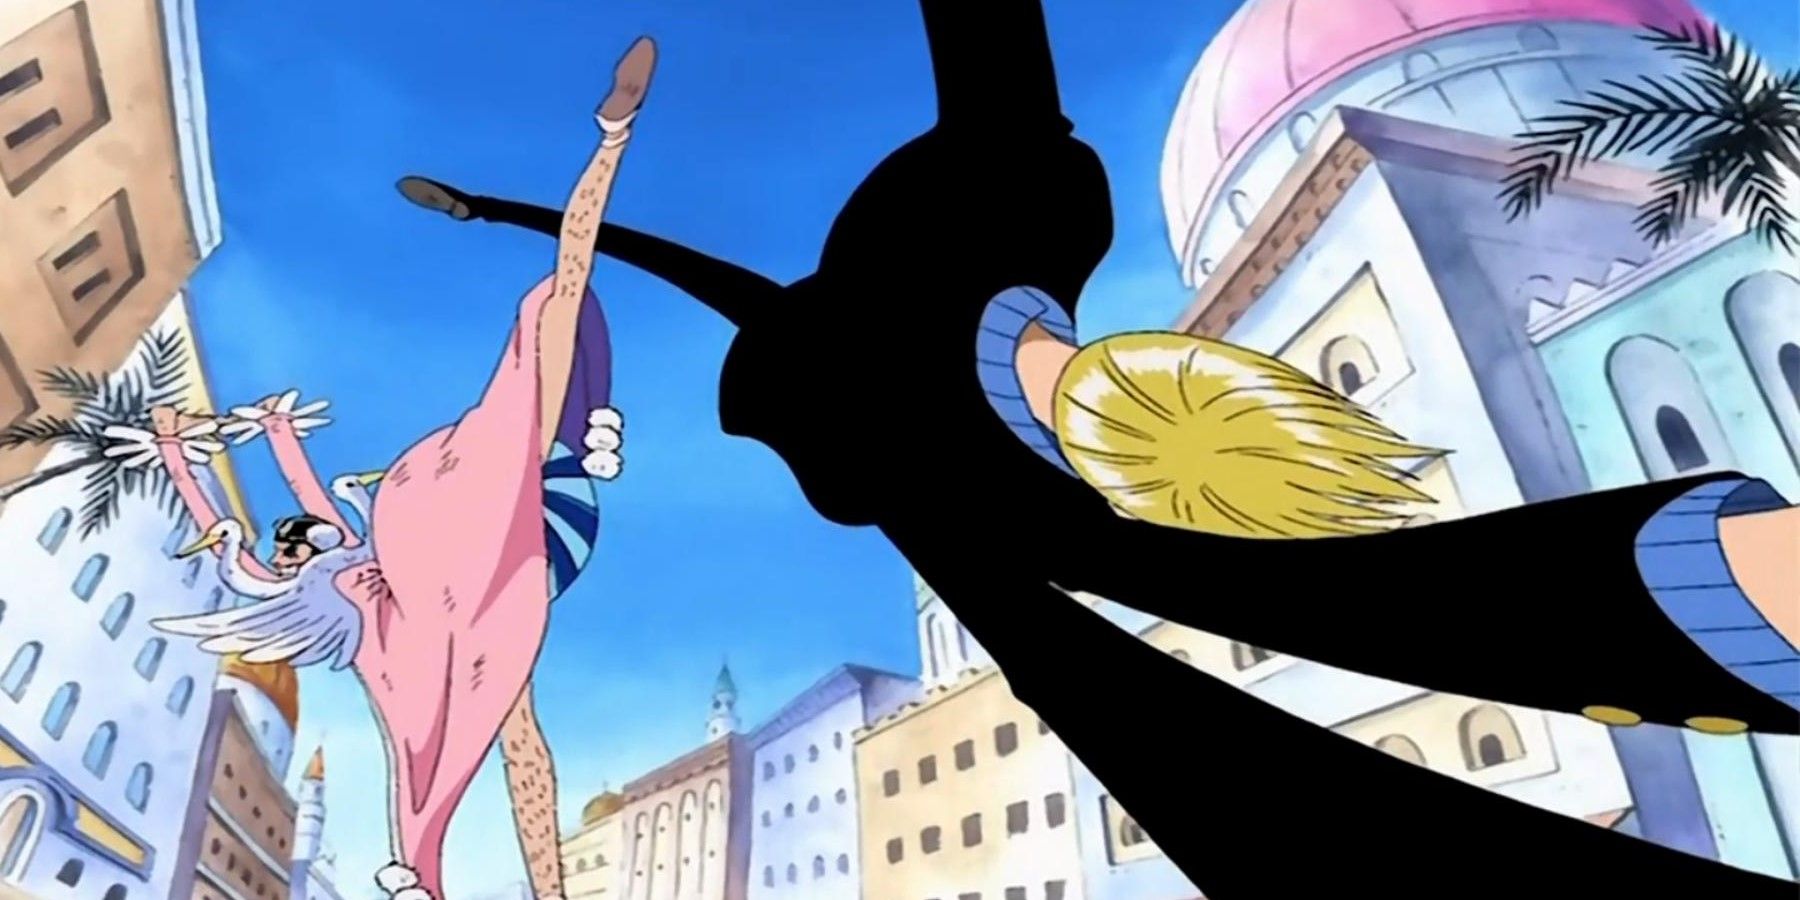 Sanji and Mr. 2 fighting in the street and doing flips in One Piece